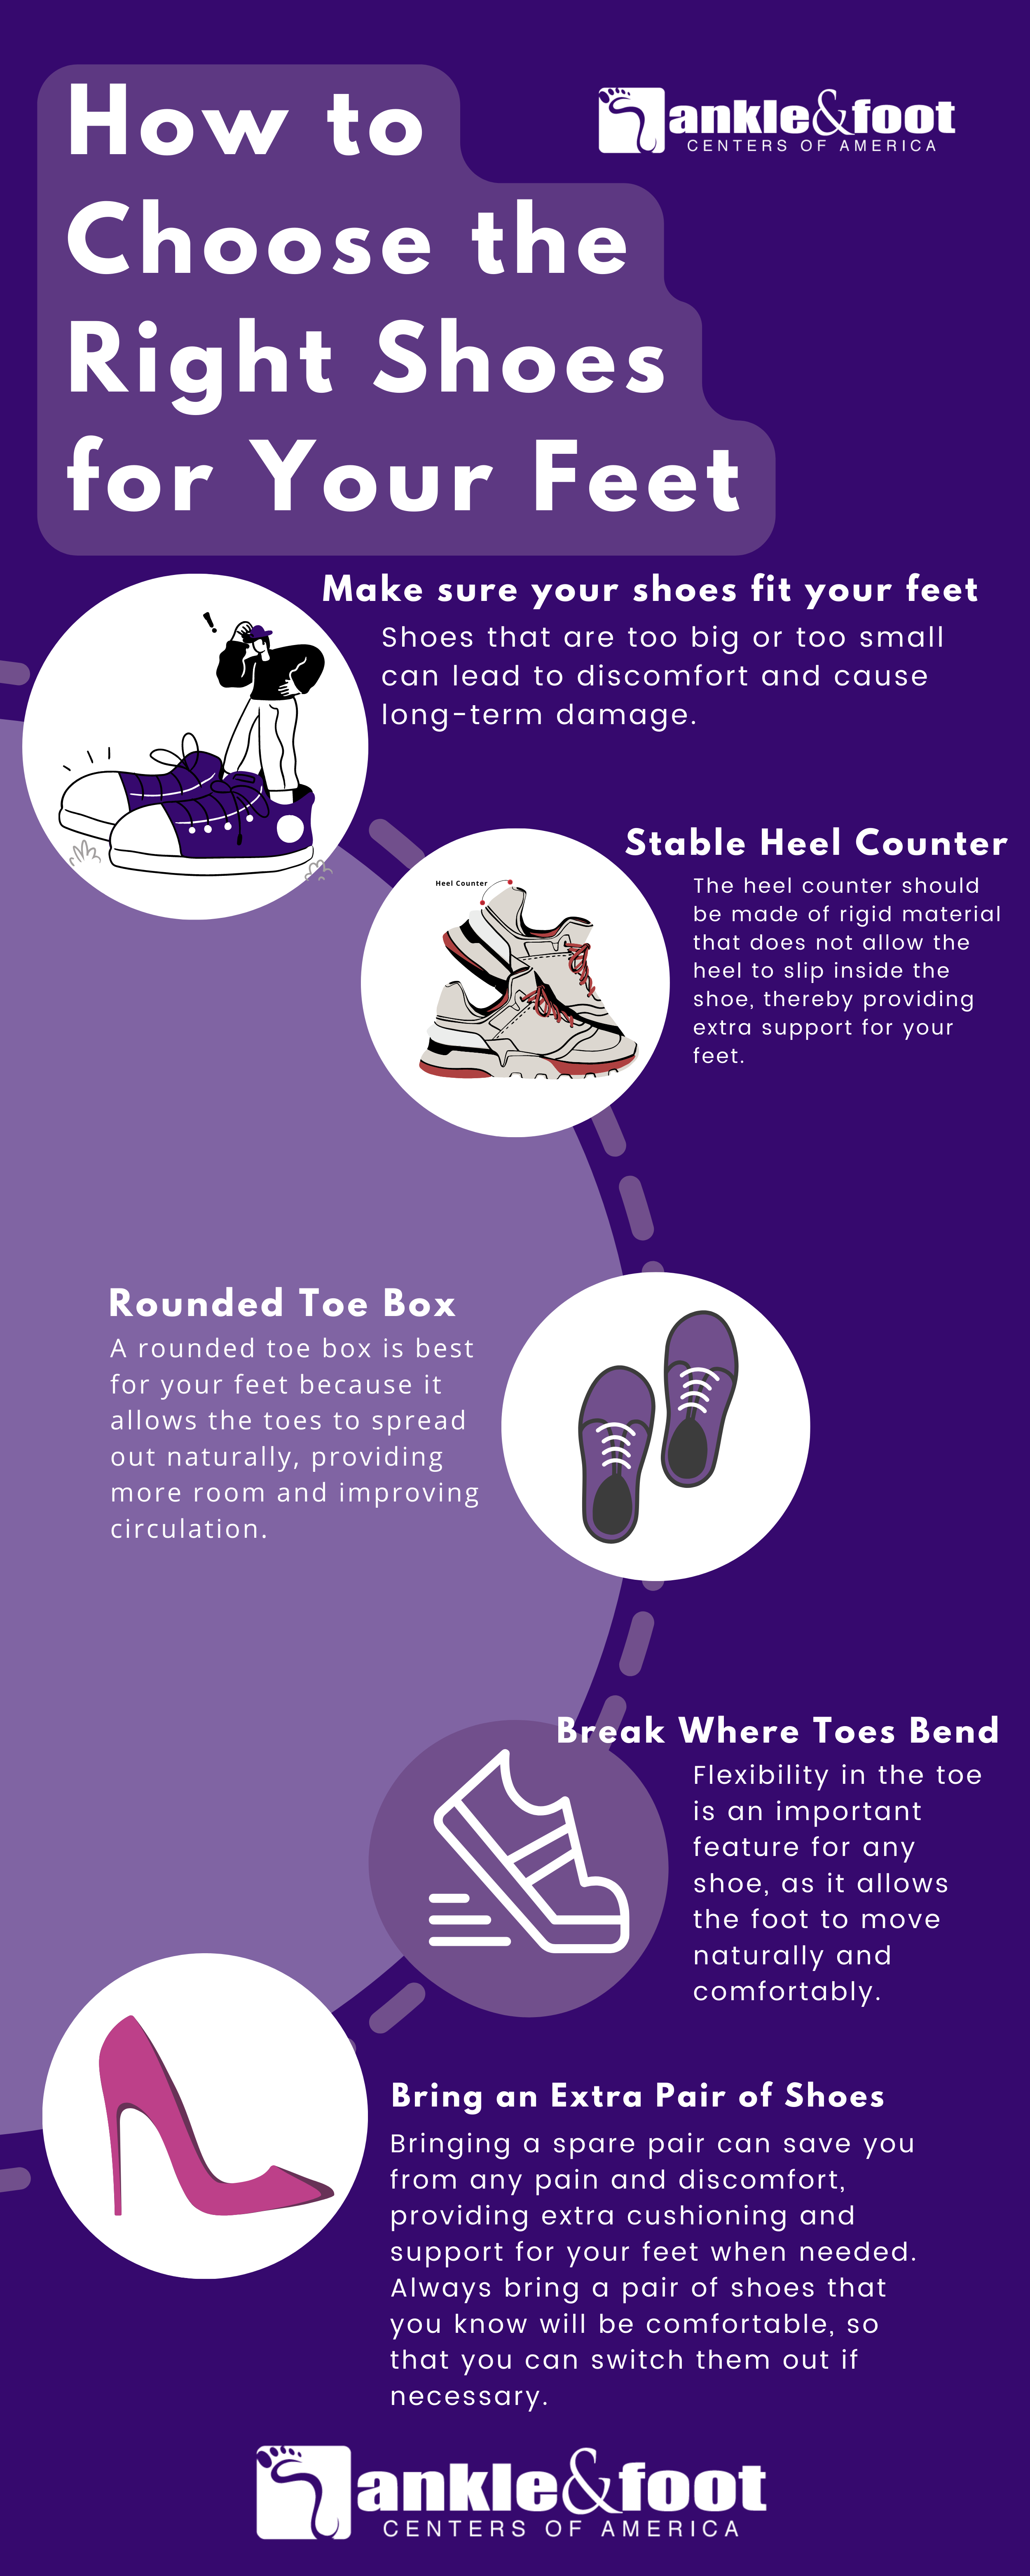 How to Choose the Right Shoes for Your Feet!